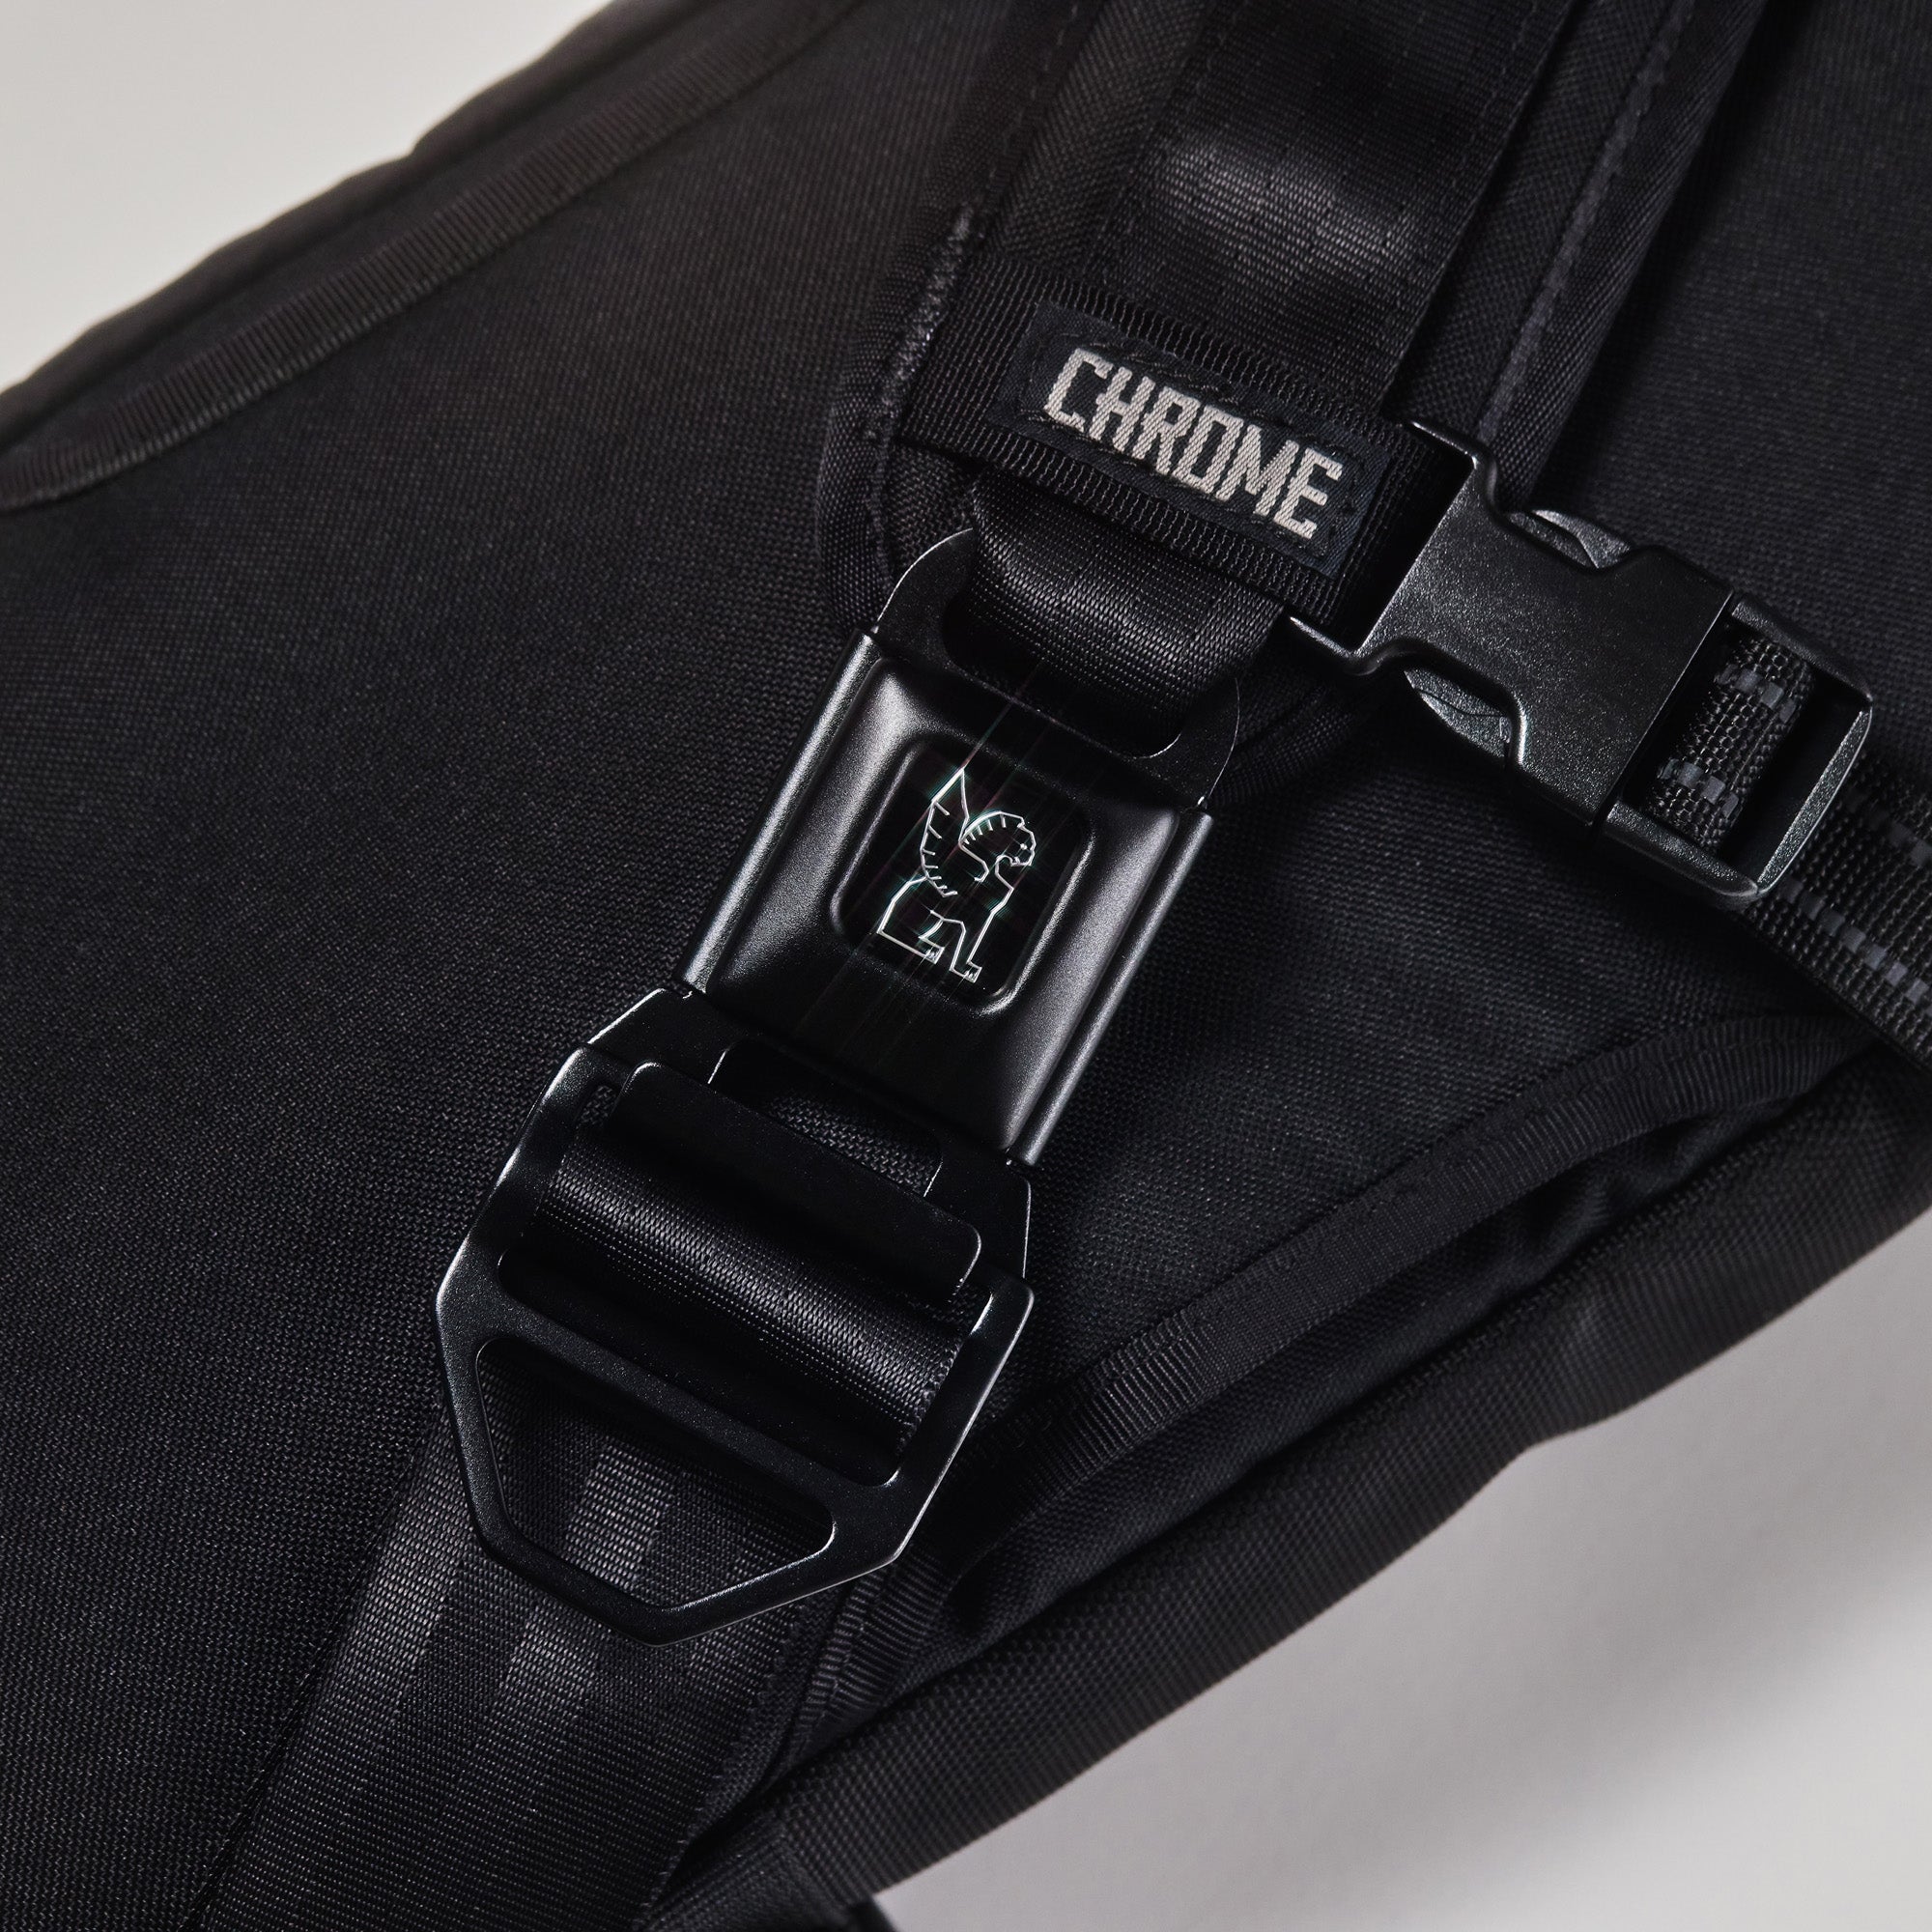 Chrome LG iconic buckle in black shown on a Kadet #color_black